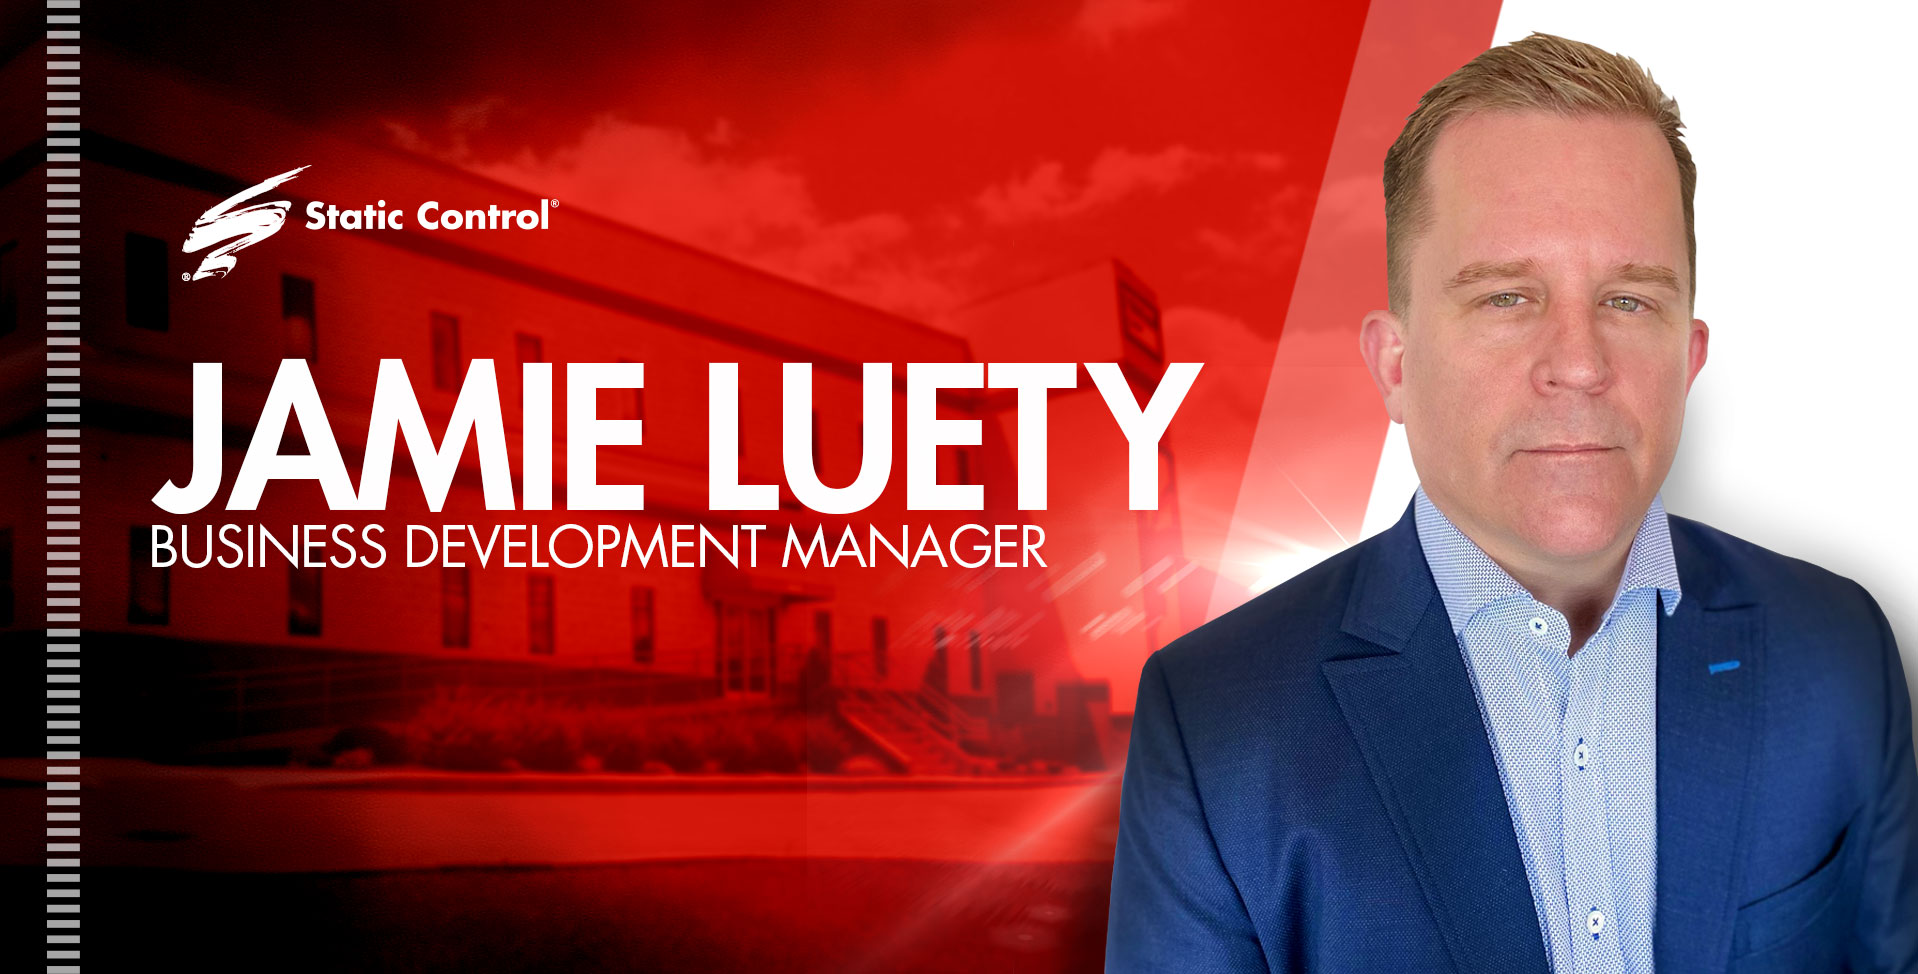 Jamie Luety Announced as Static Control's most recent Business Development Manager 